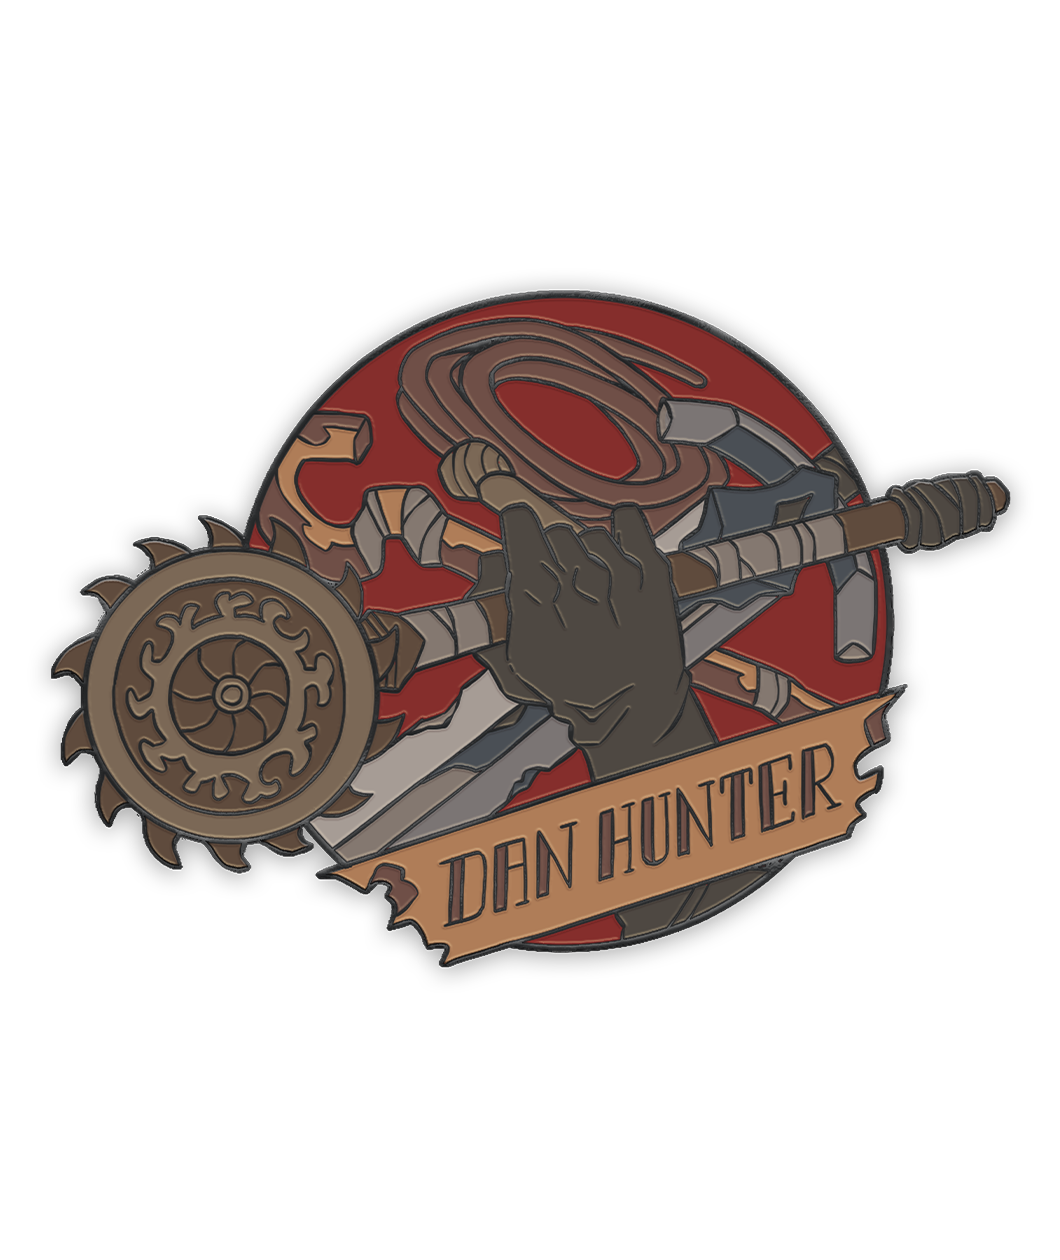 A pin of a hand holding a bar with a blade on the end with the text "Dan Hunter". From Playframe.